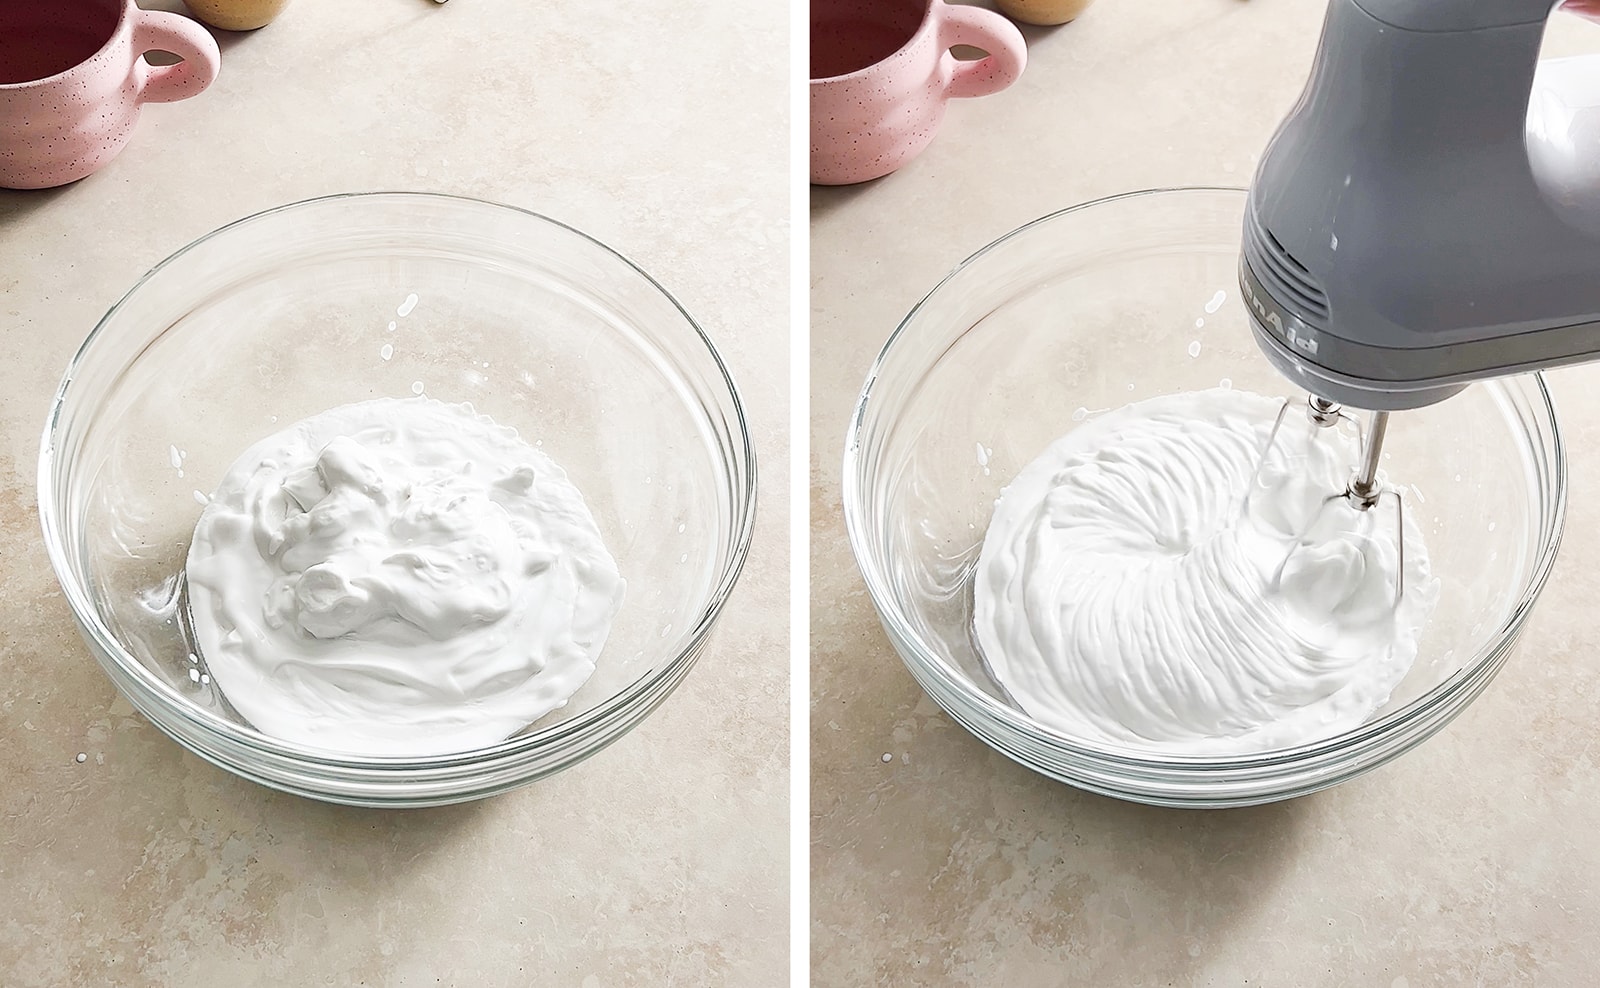 Left to right: coconut cream in a bowl, mixing coconut cream with a hand mixer.